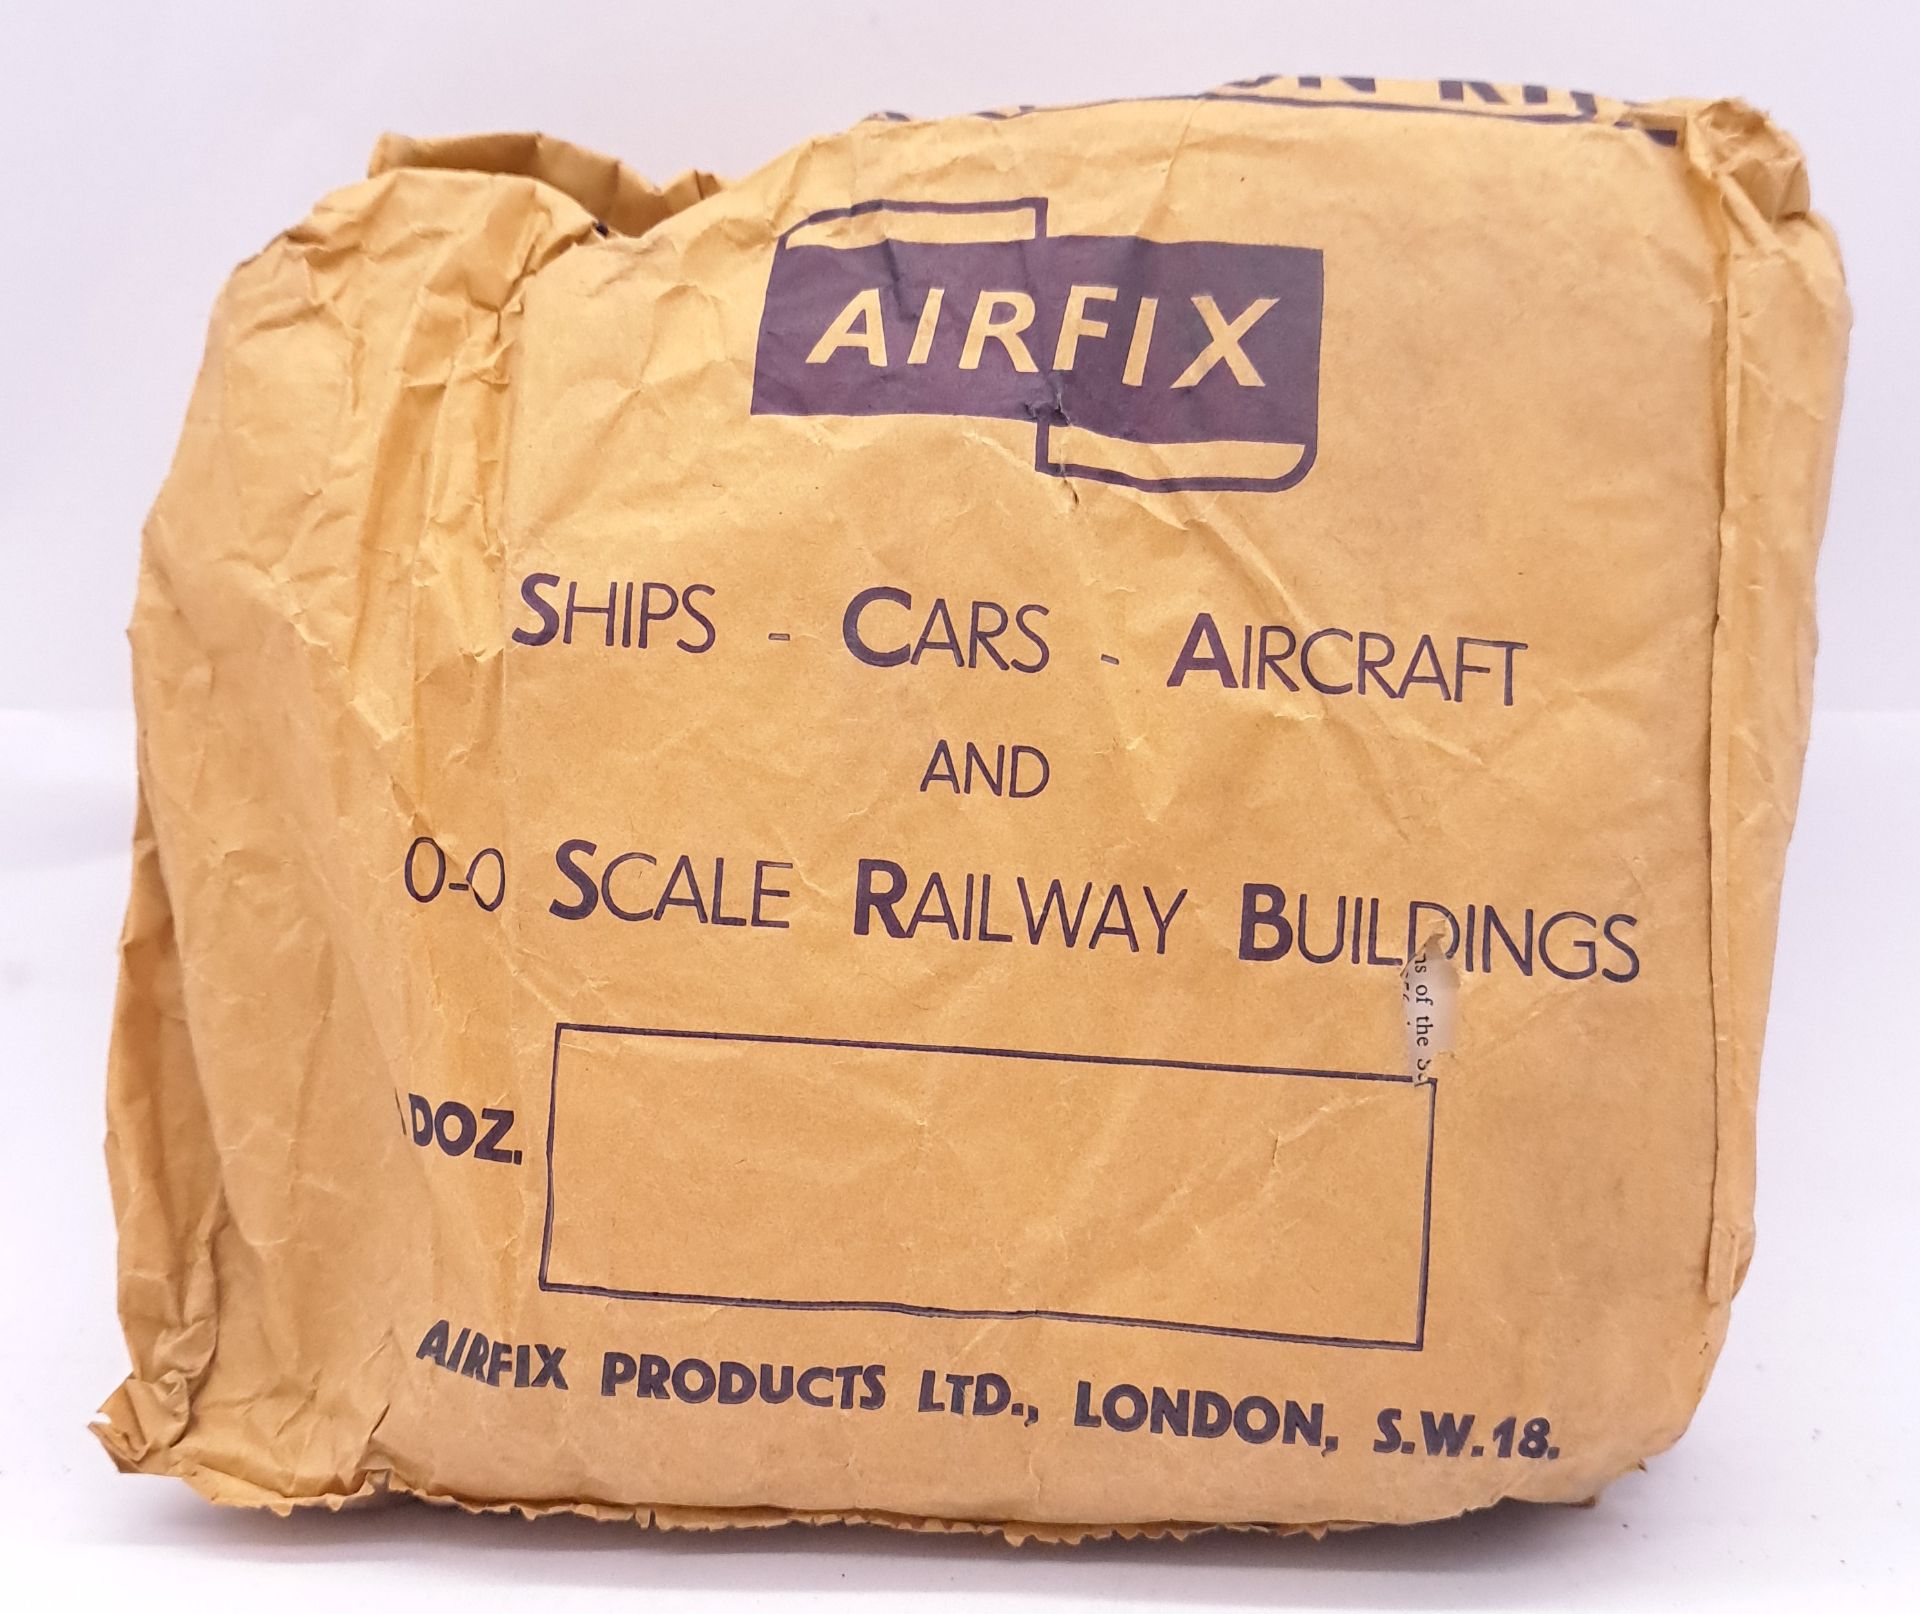 Airfix c1960’s ORIGINAL TRADE BAG complete with Bagged (possibly Type3) “Seahawk” Kits - Image 2 of 6